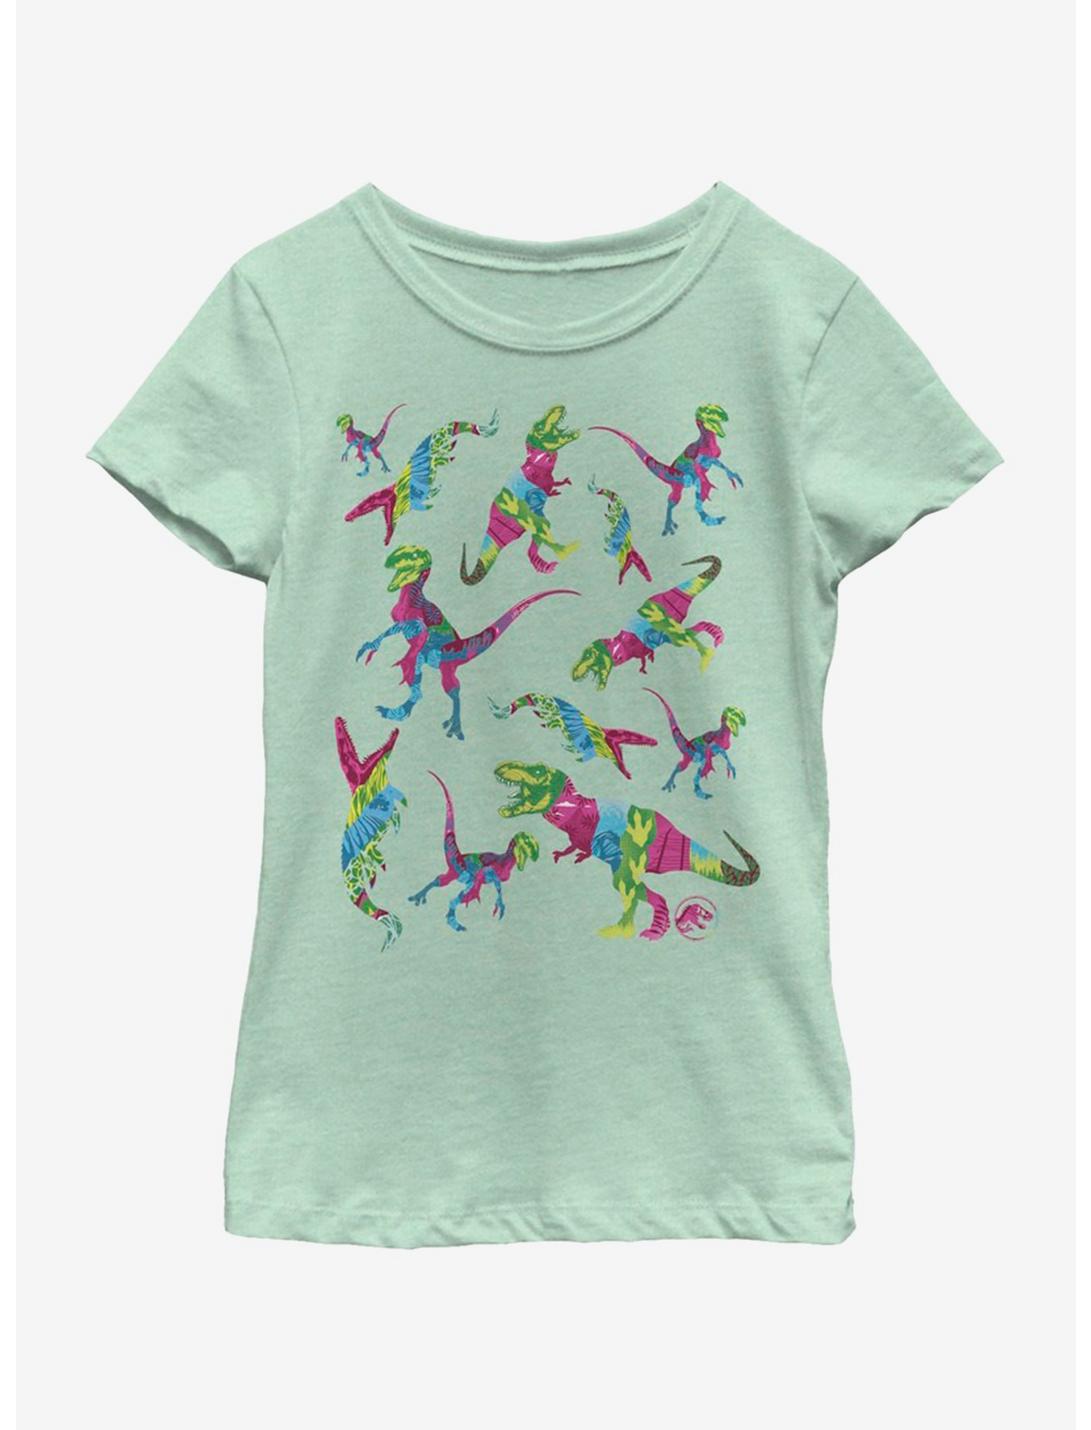 Jurassic Park Colorful Dino Toss Youth Girls T-Shirt, MINT, hi-res